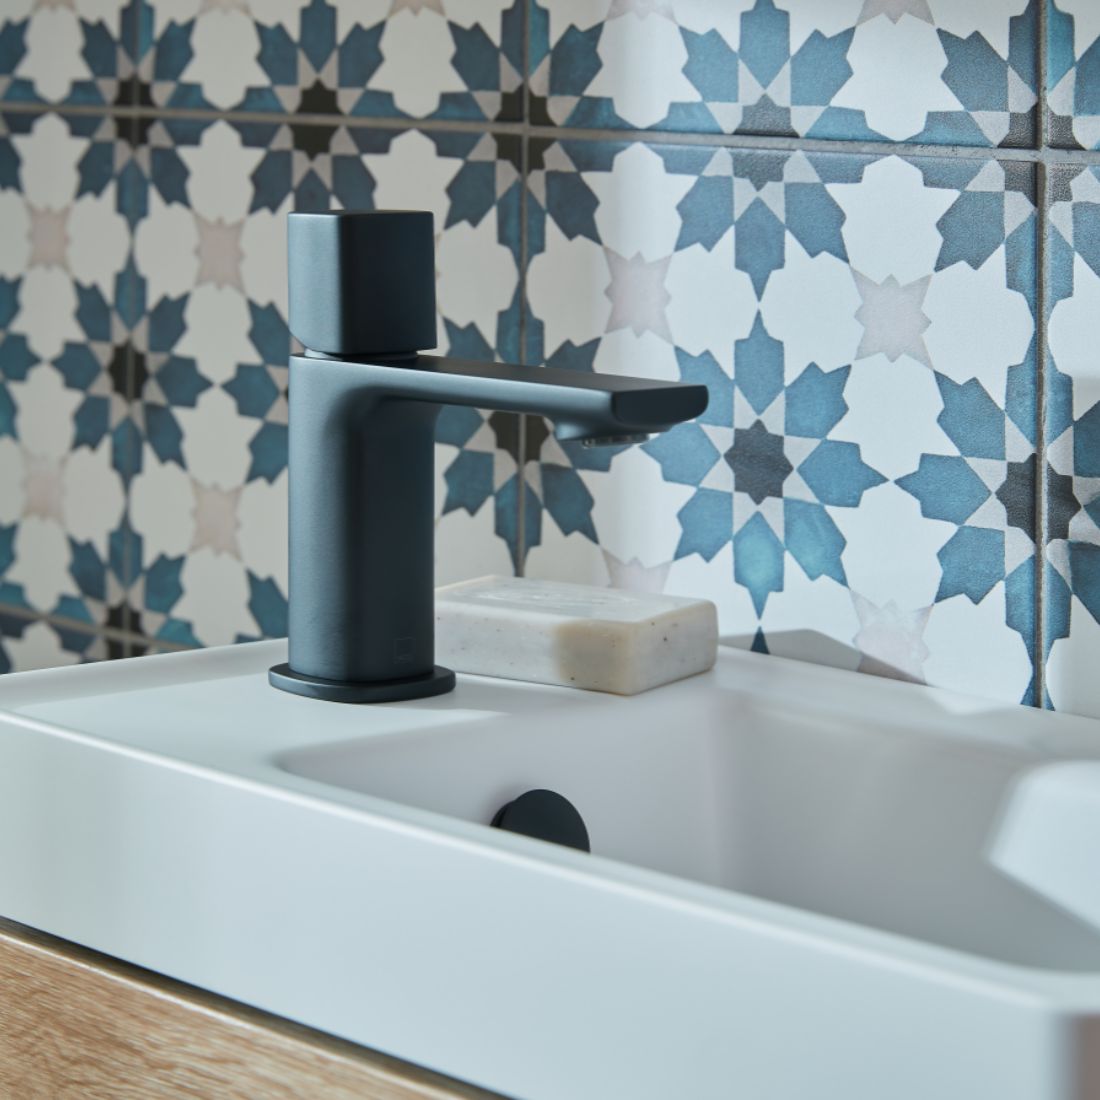 Browse Cameo Taps and Showers